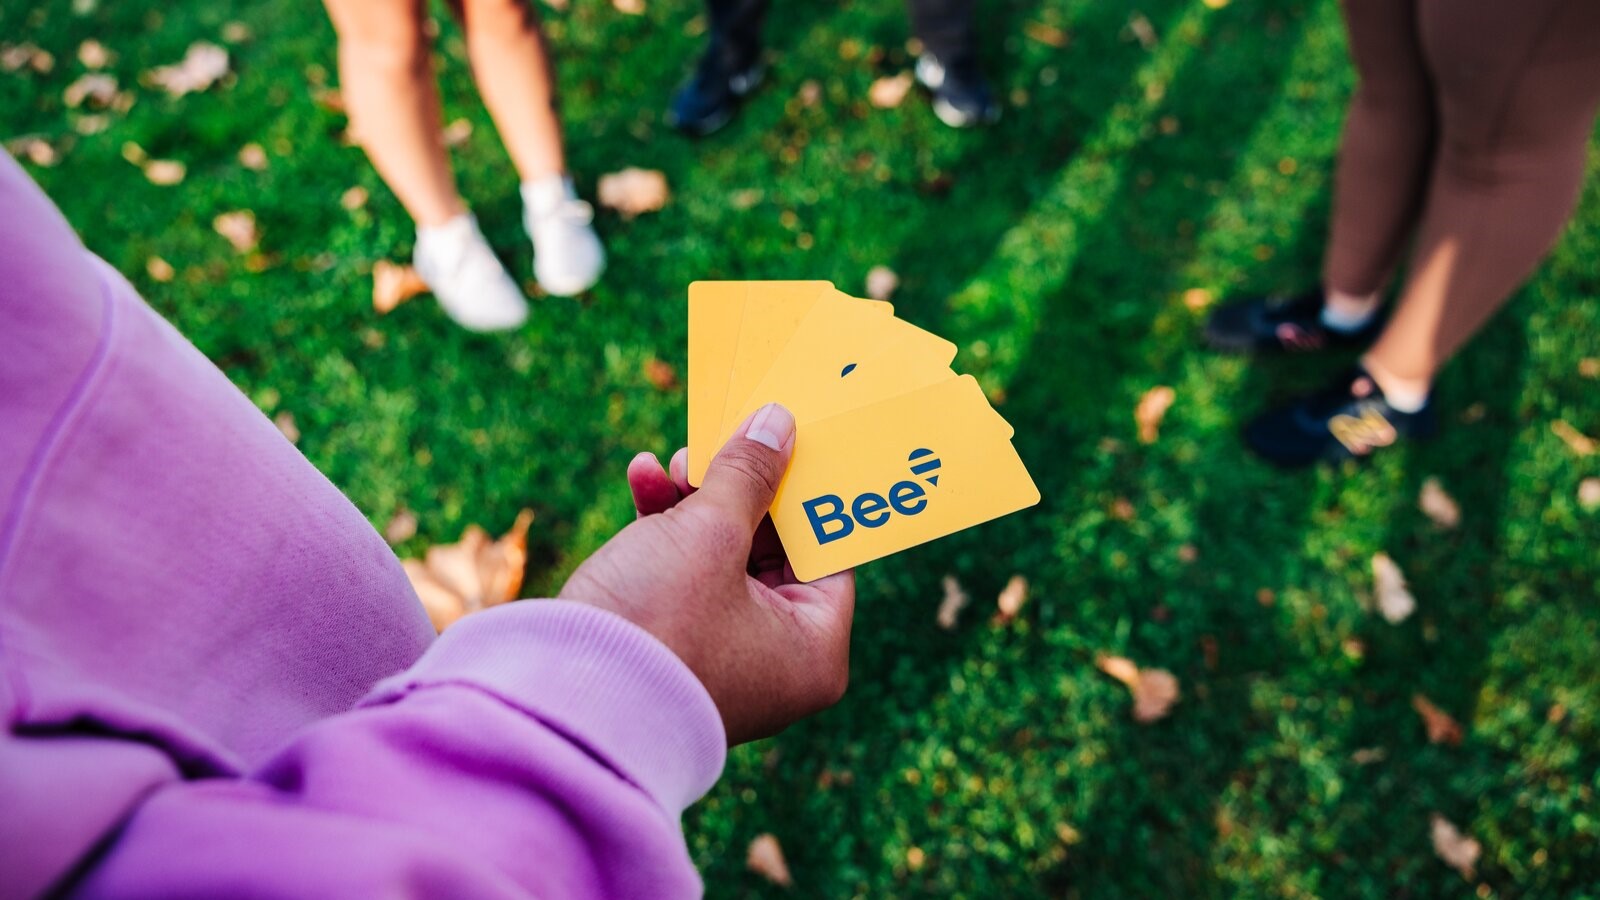 Bee cards held by person in community